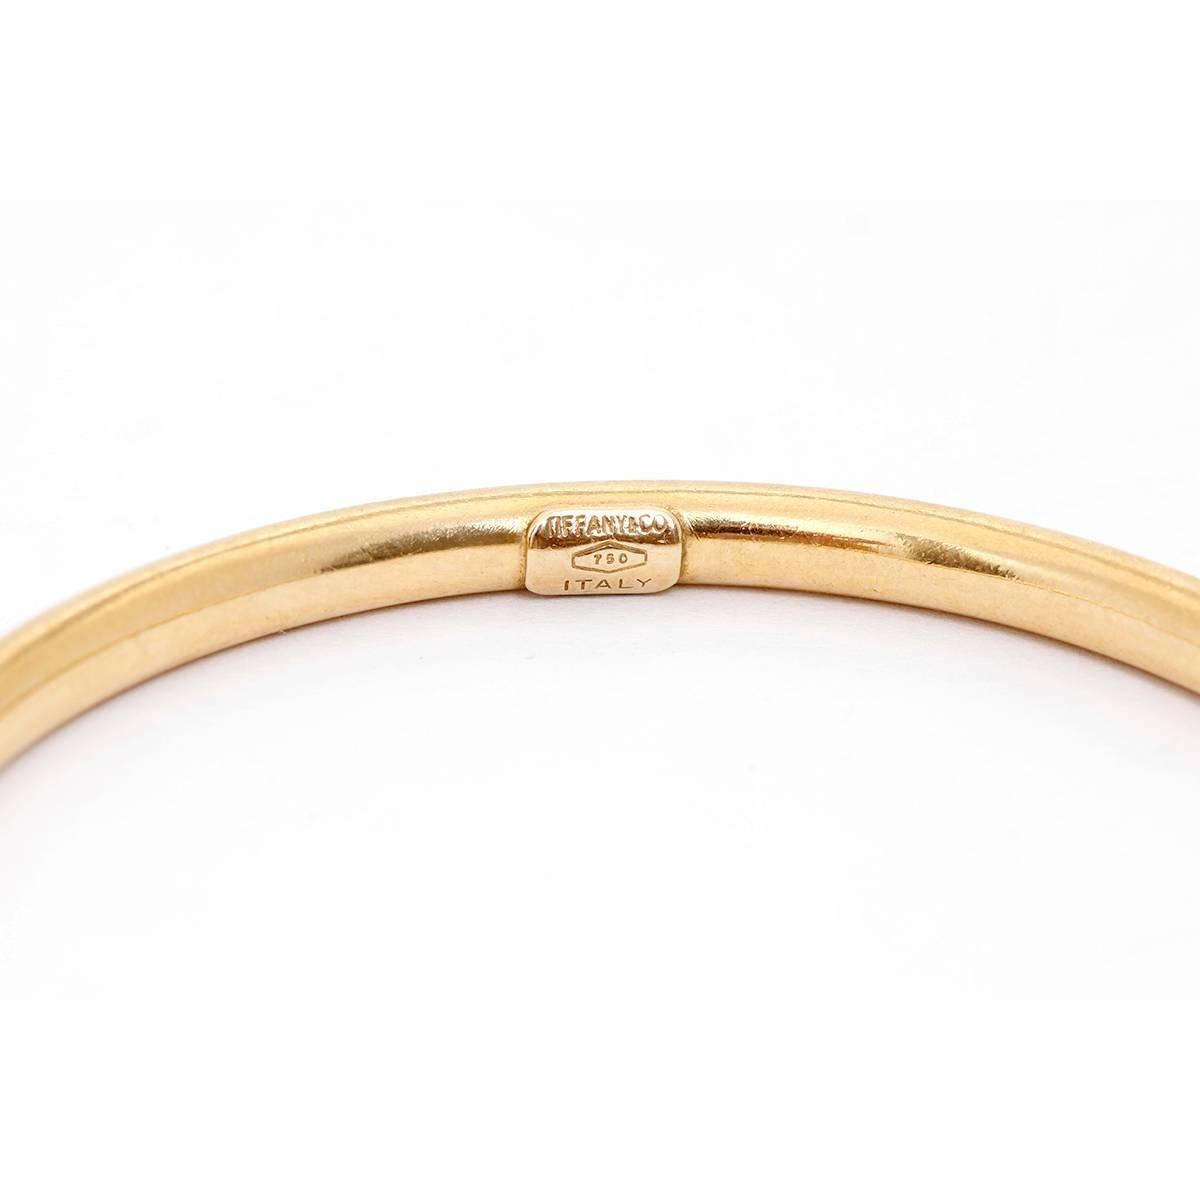 Tiffany & co. 14K Yellow Gold Hinged Oval Bangle Size 6 3/4 - . Pre-owned. Inner diamenter 17.1 cm. Size 6 3/4. Hallmarks Tiffany & Co., 585. Total weight 8 grams. Tiffany Estate piece.